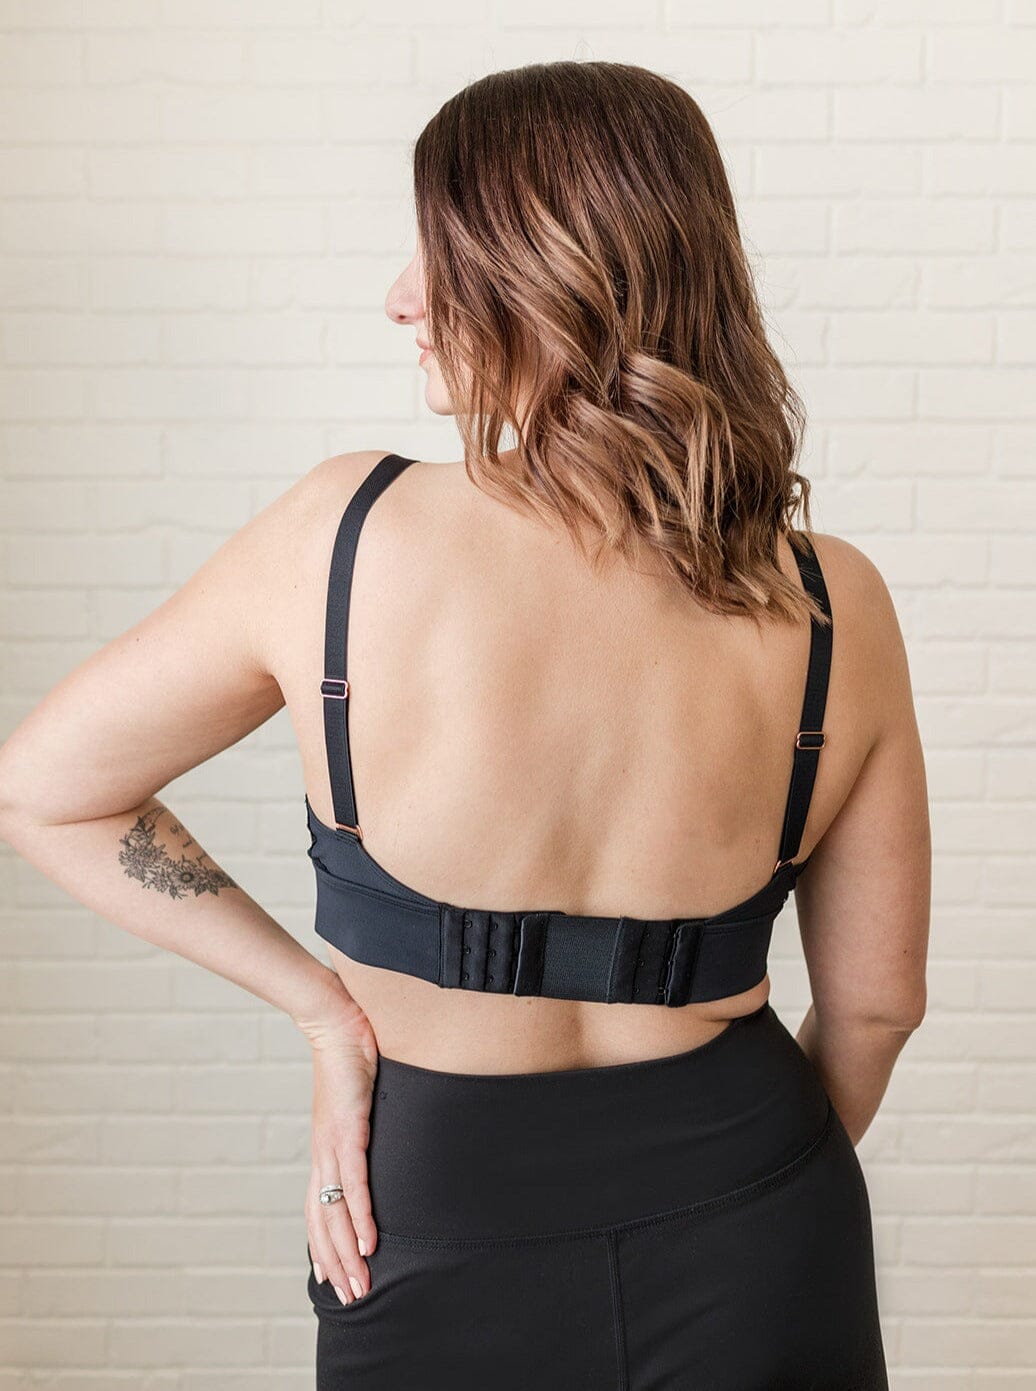 Perifit Pump: How to use the bra extender strap in your order 